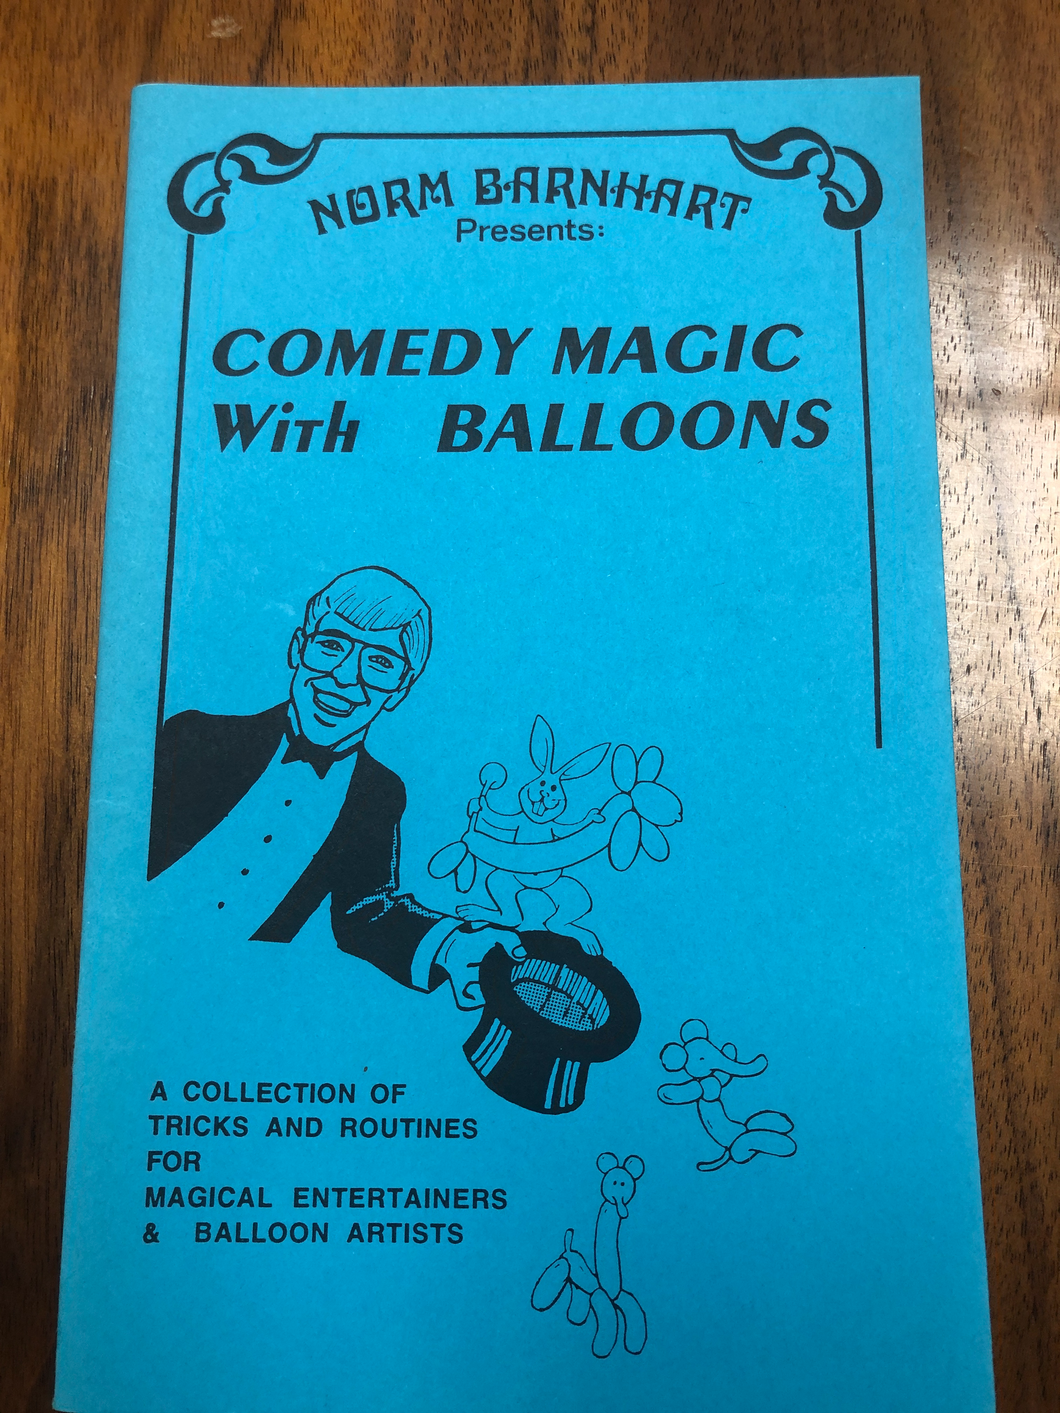 Comedy magic with balloons by Norm Barnhart